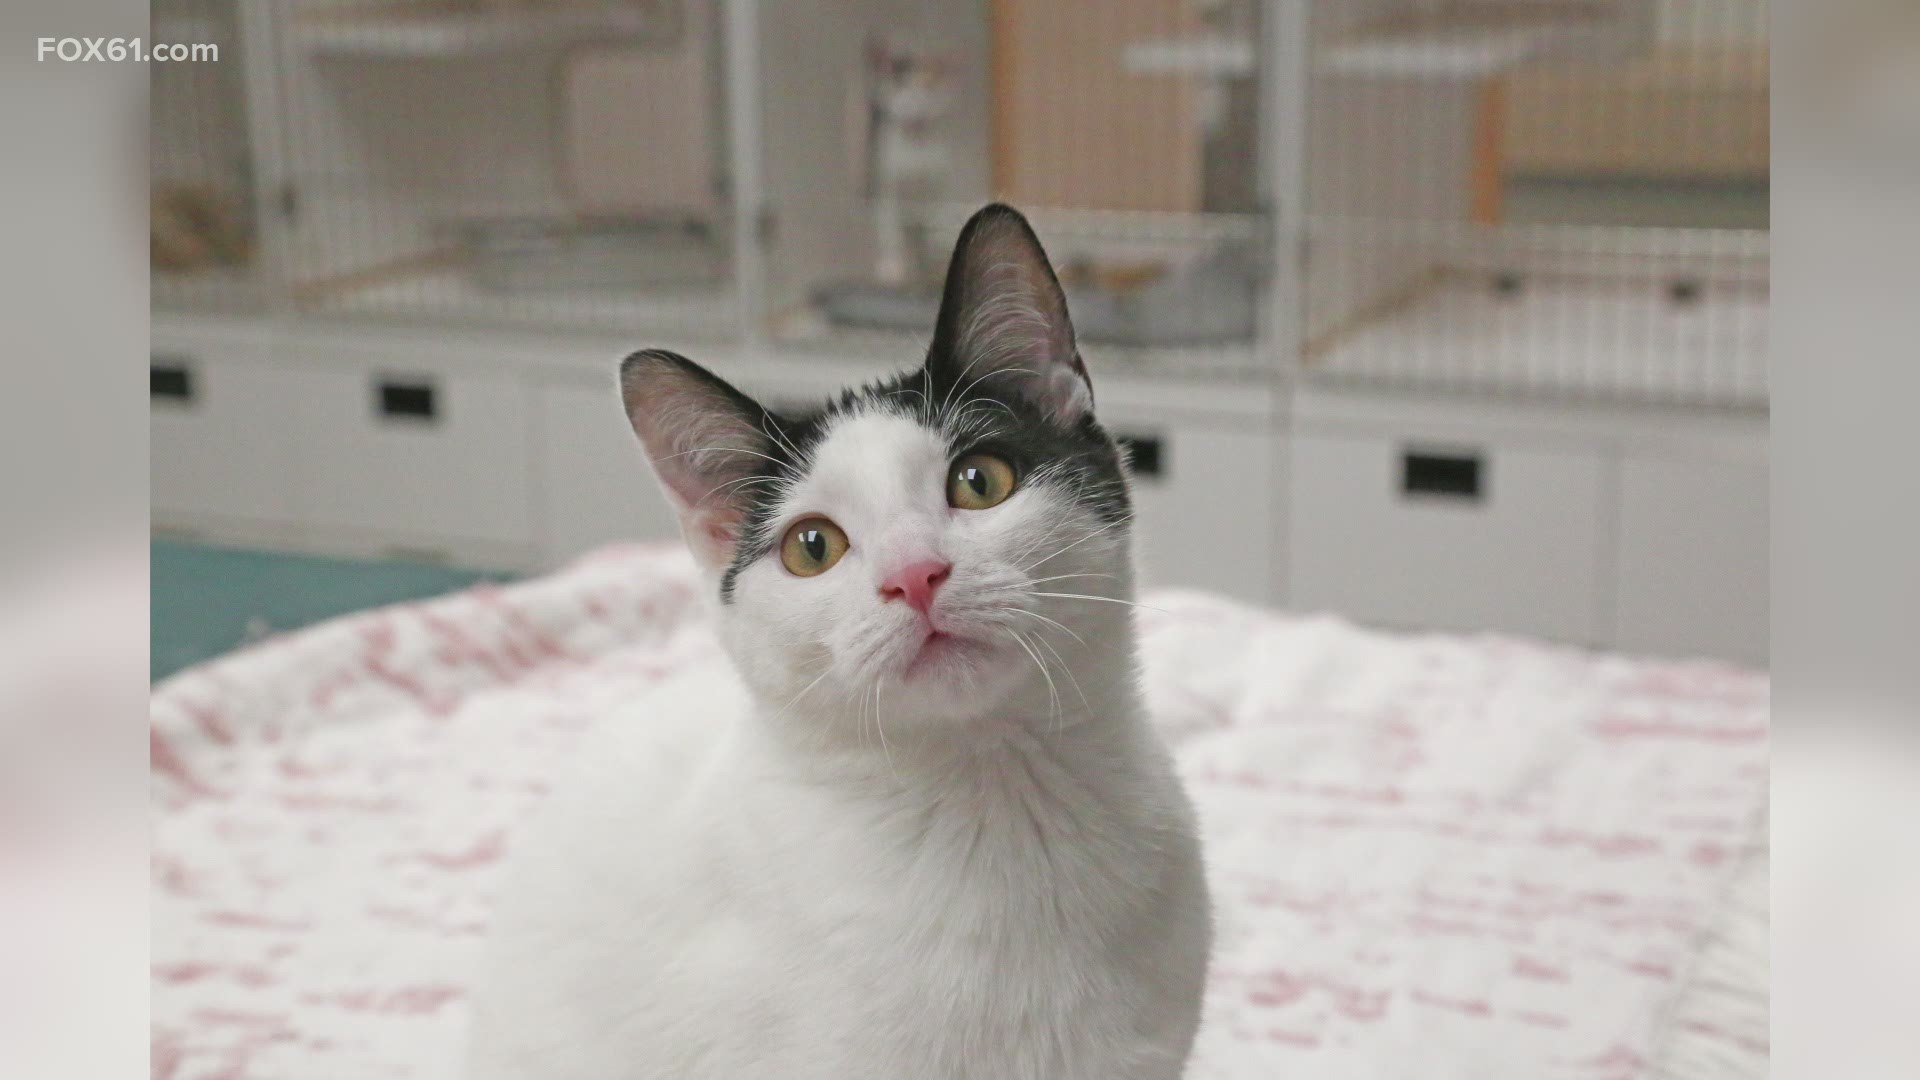 Meet Naomi, a 4 month old kitten looking for her forever home!